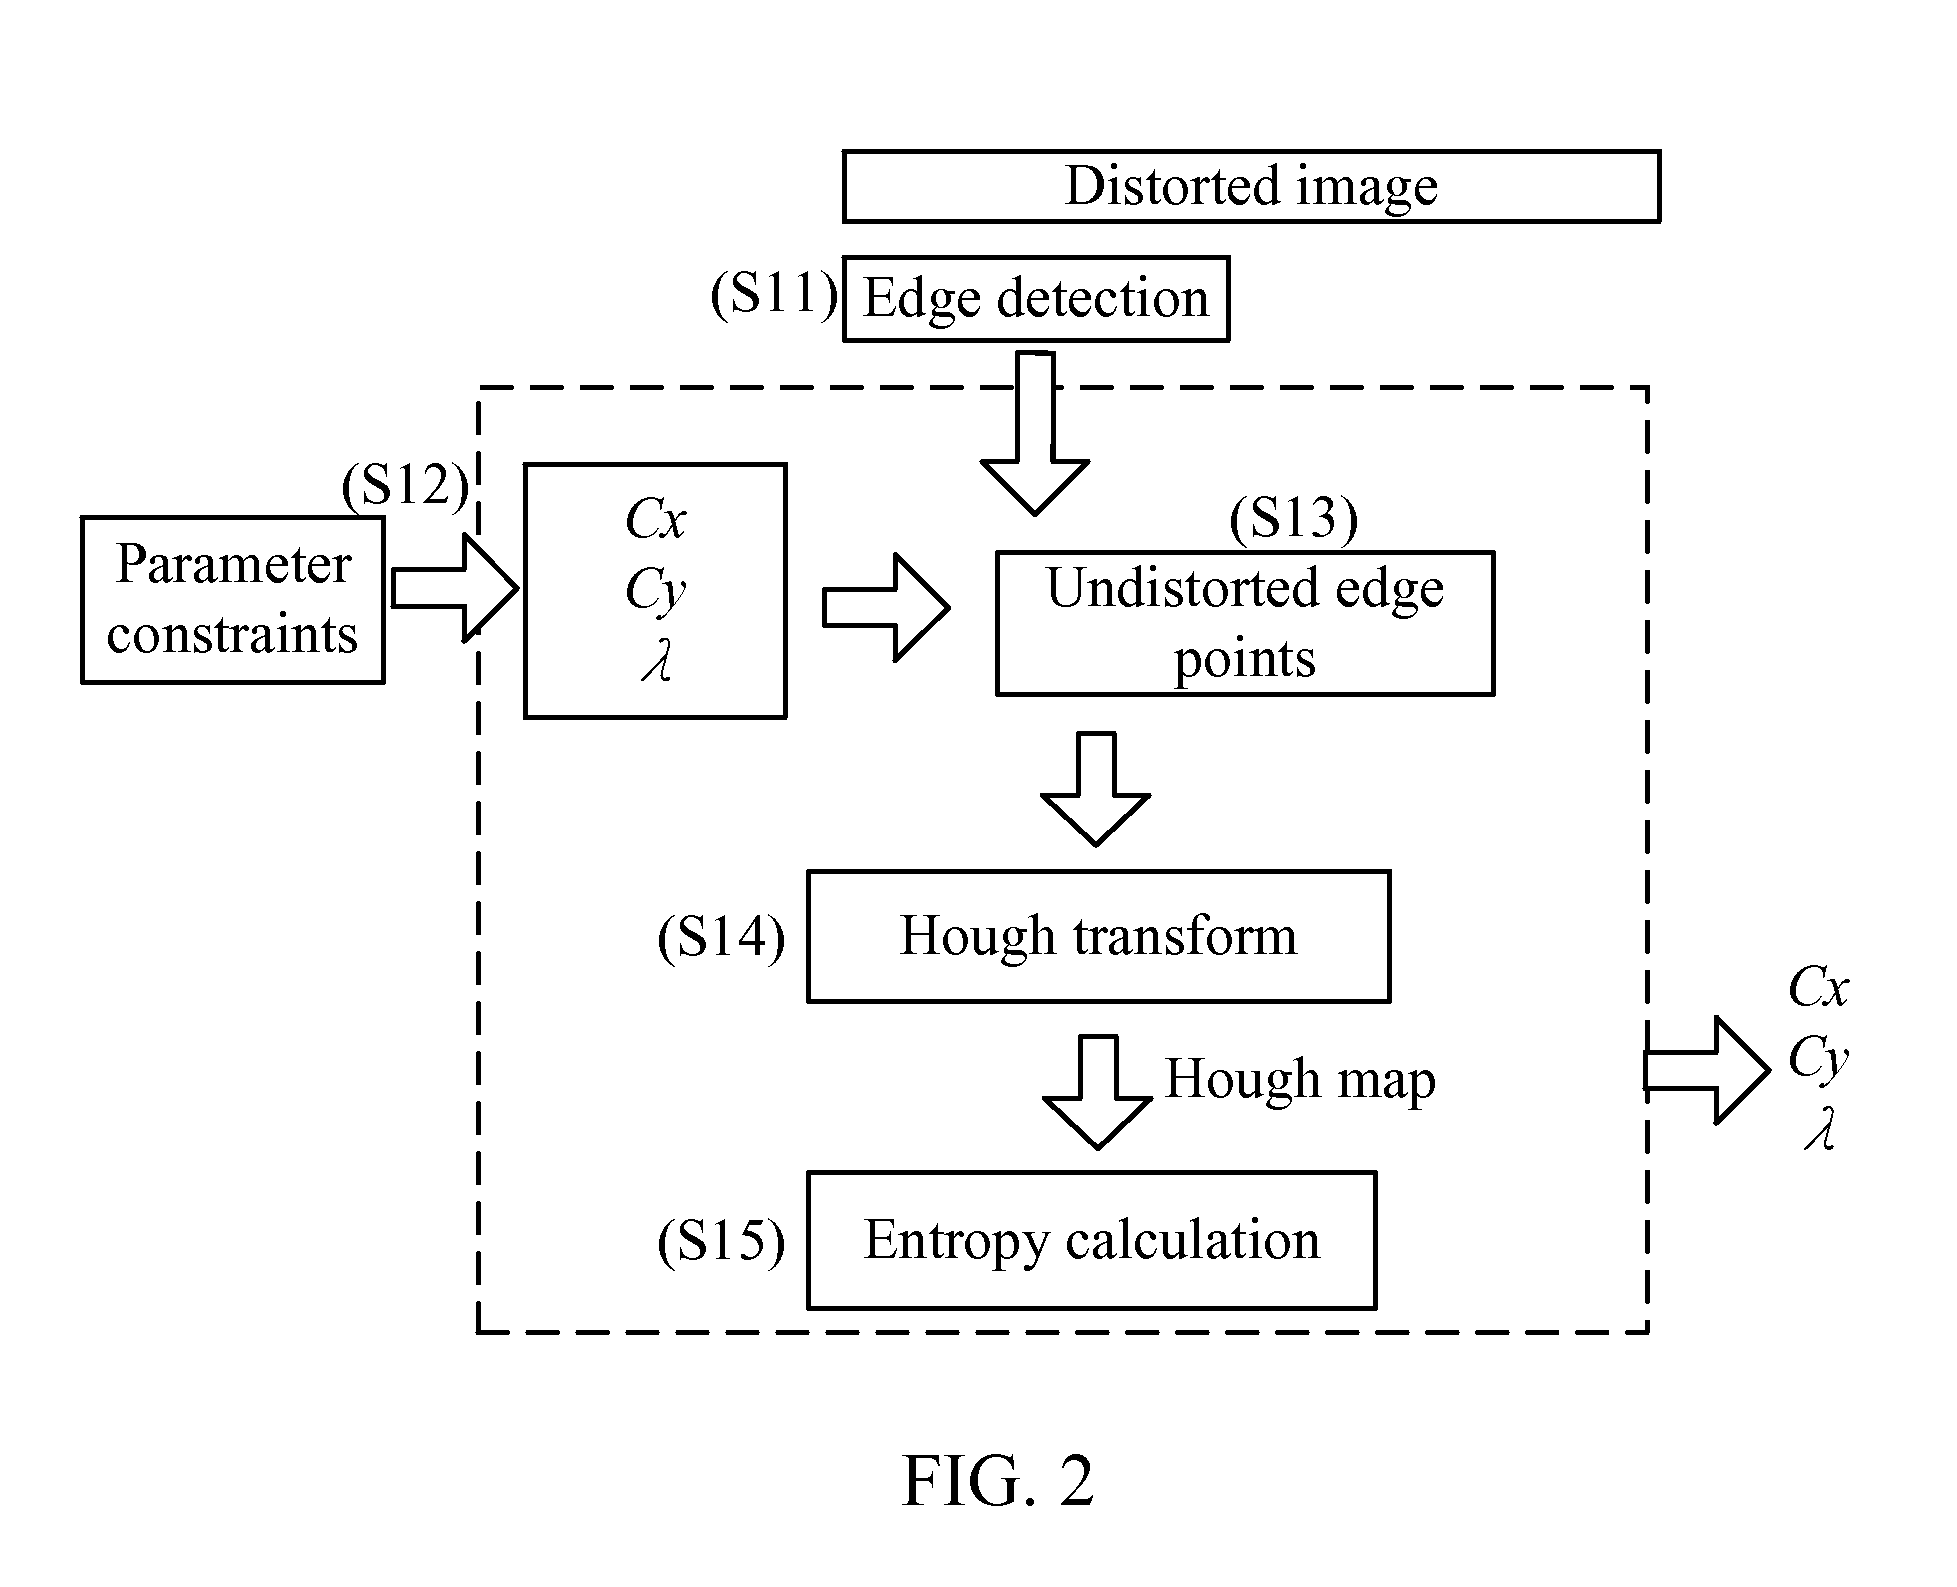 Image processing method applicable to images captured by wide-angle zoomable lens